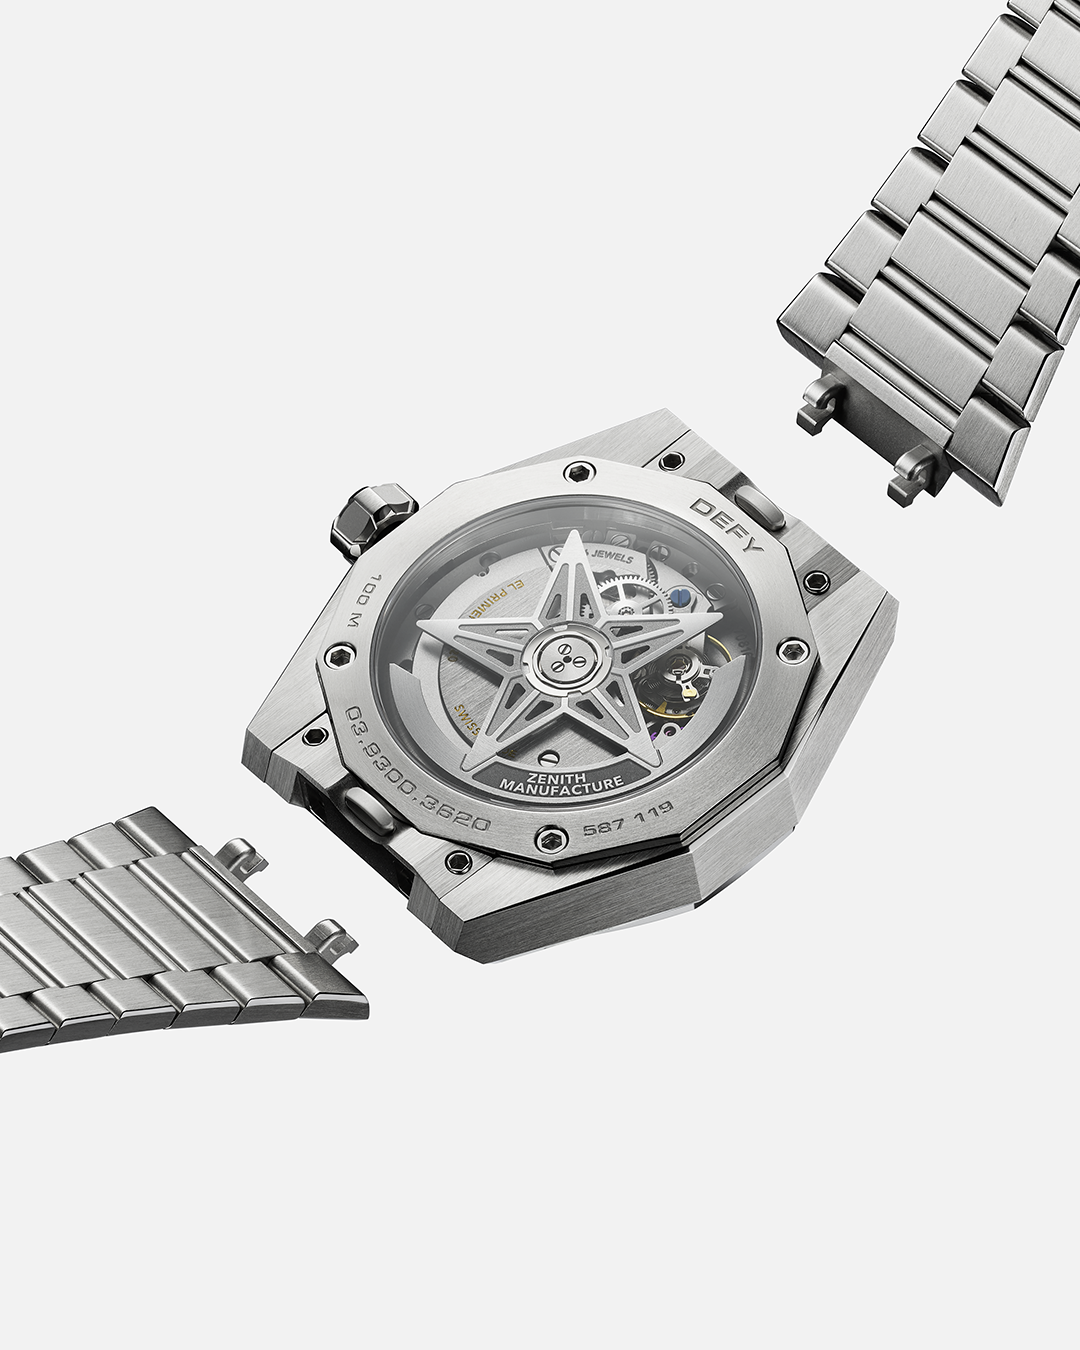 Love this Zenith Defy but is it too indulgent